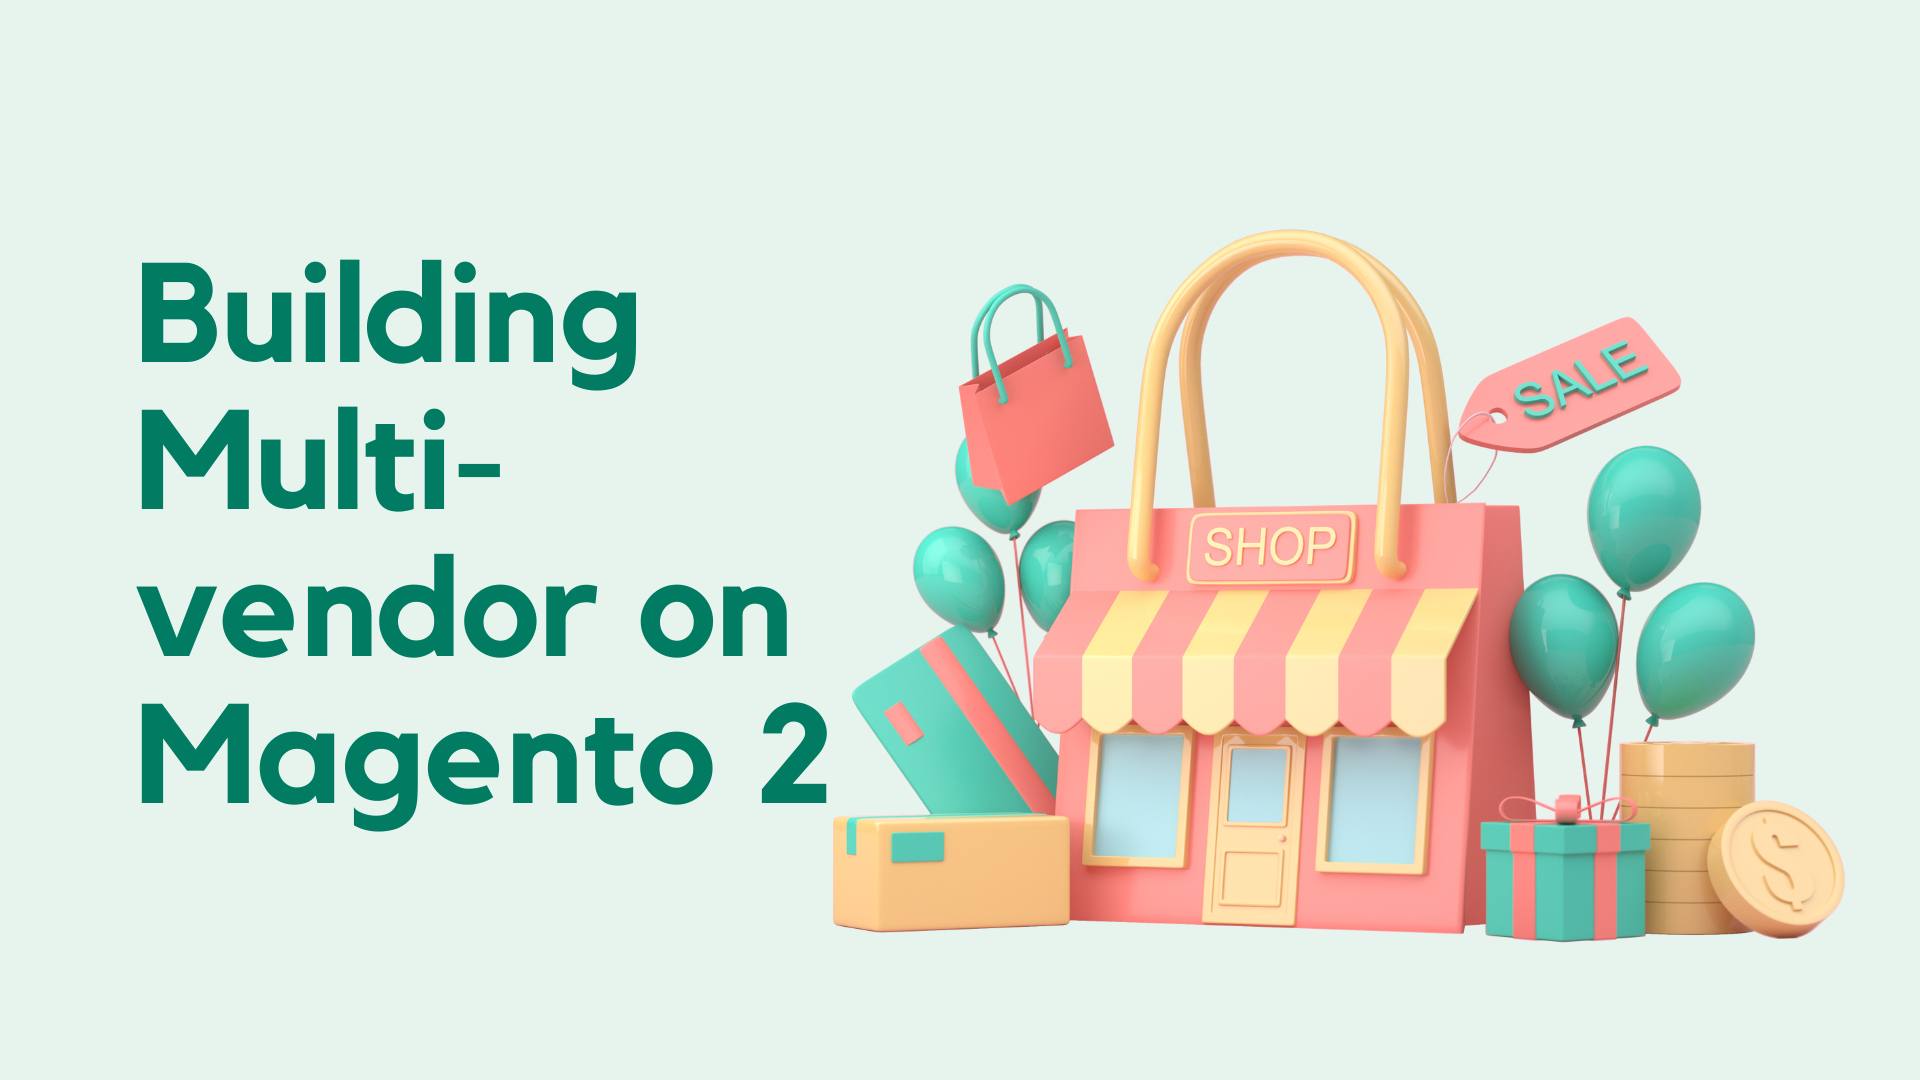 The ultimate guide to building multi vendor marketplace in Magento 2 successfully